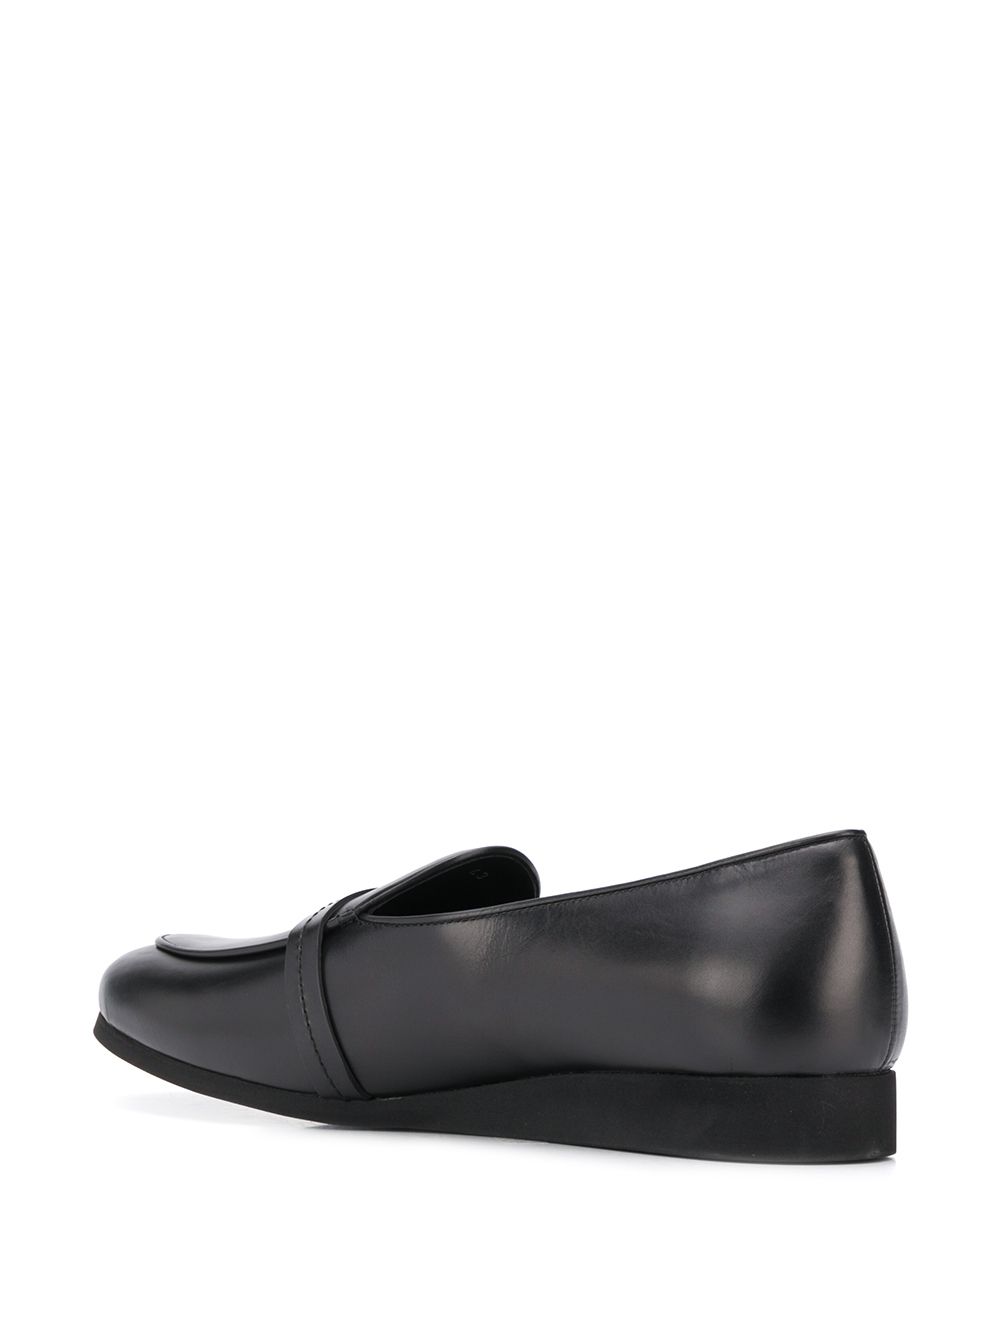 фото 1017 alyx 9sm round-toe buckled loafers